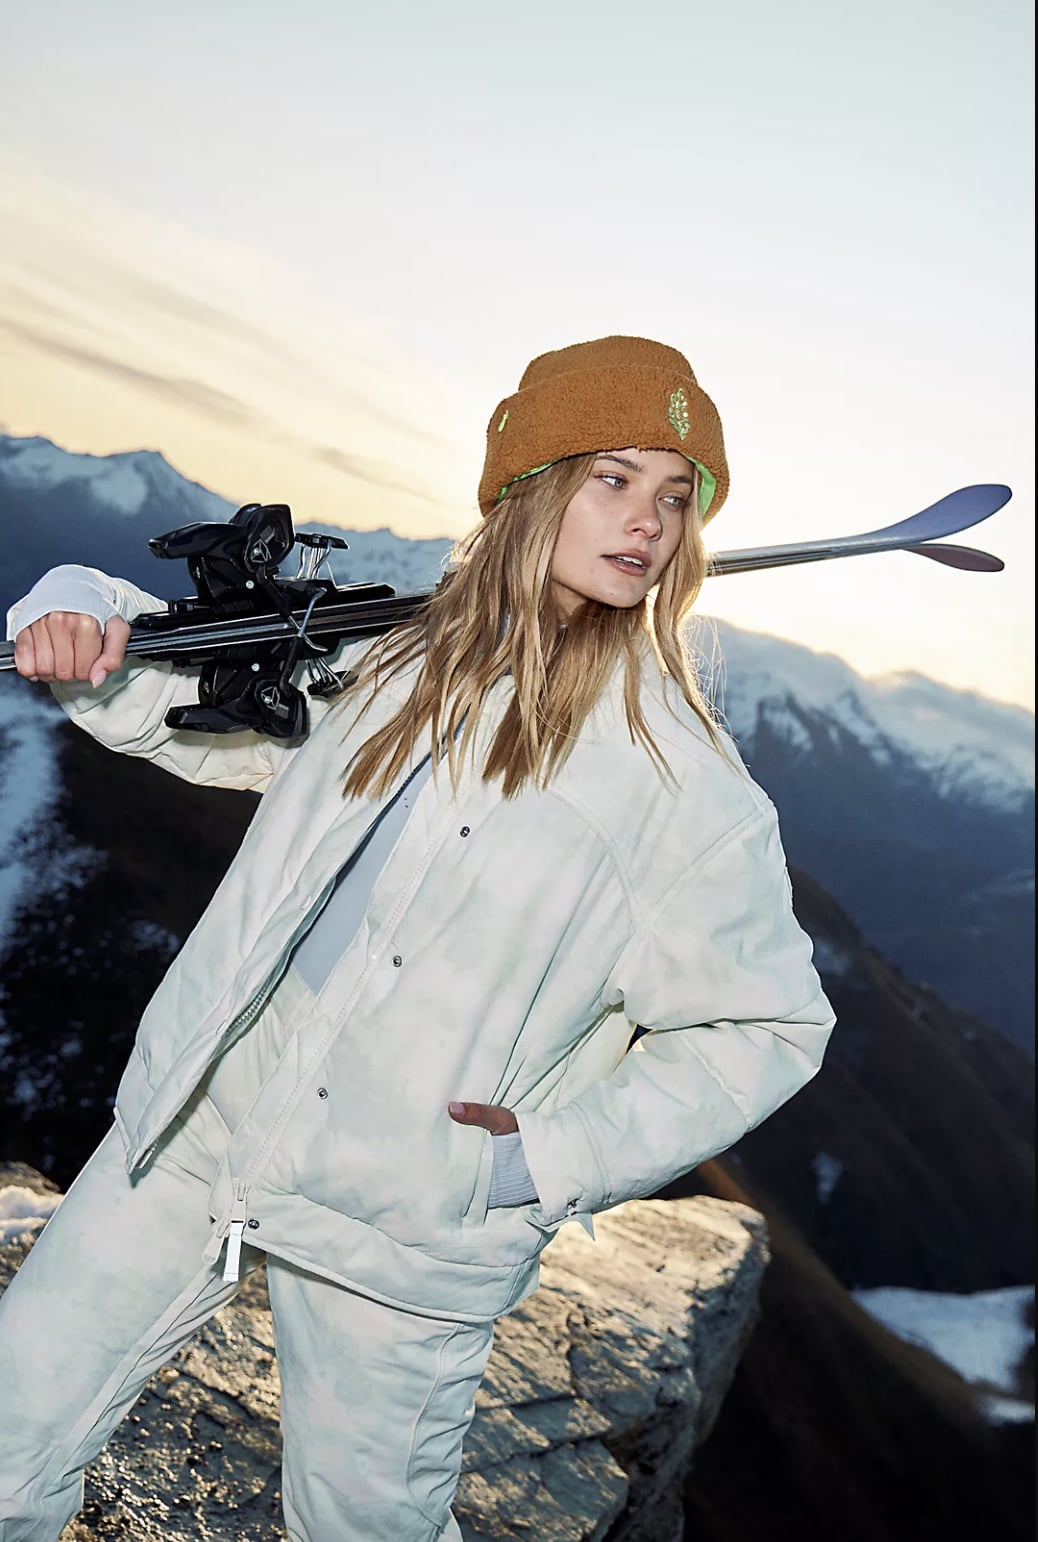 25 Chic Ski Outfits To Wear On The Slopes